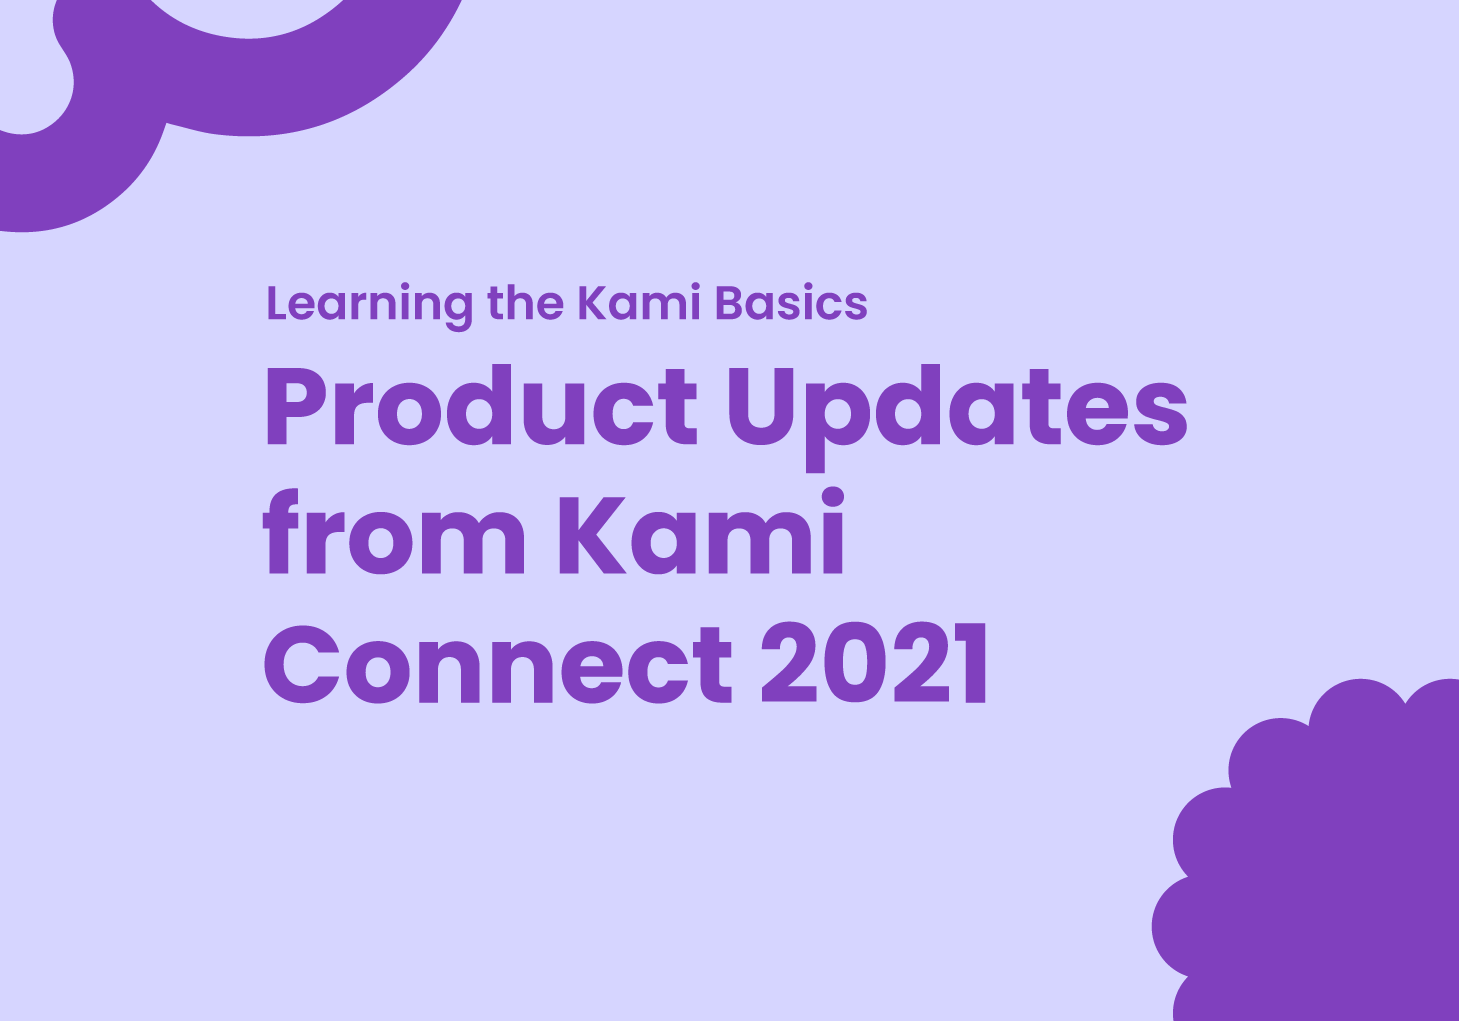 Learning the Kami Basics: Product Updates for Kami Connect 2021